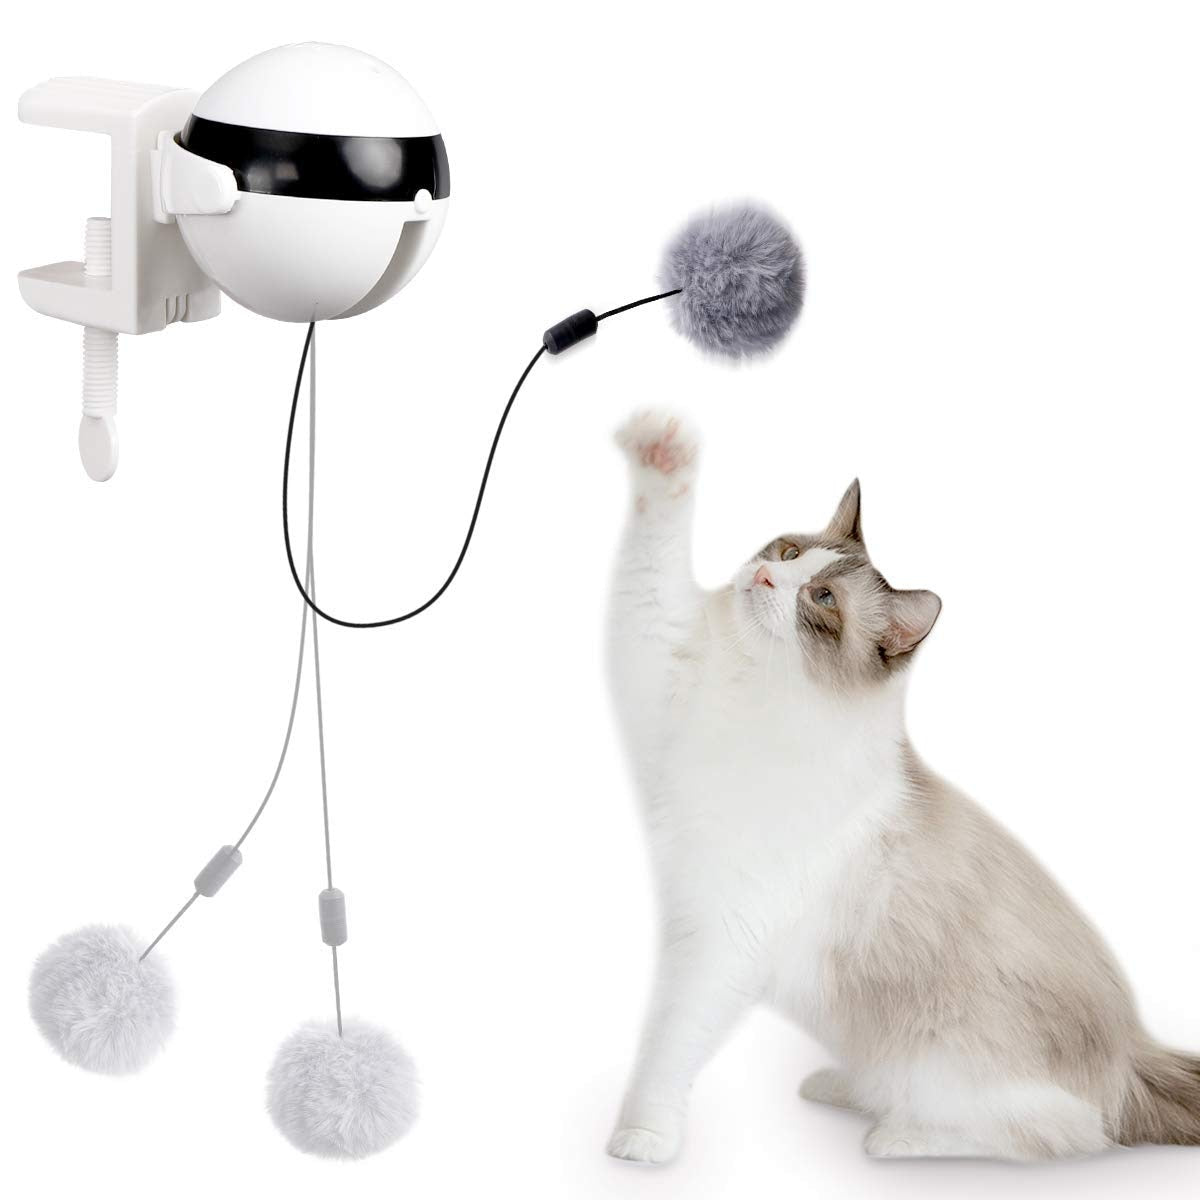 Automatic Cat Toy Ball Electric Lifting Interactive Self Playing Teaser Puzzle Smart Pet Cat Ball Toys Supplies for Cats Kitten - petsany